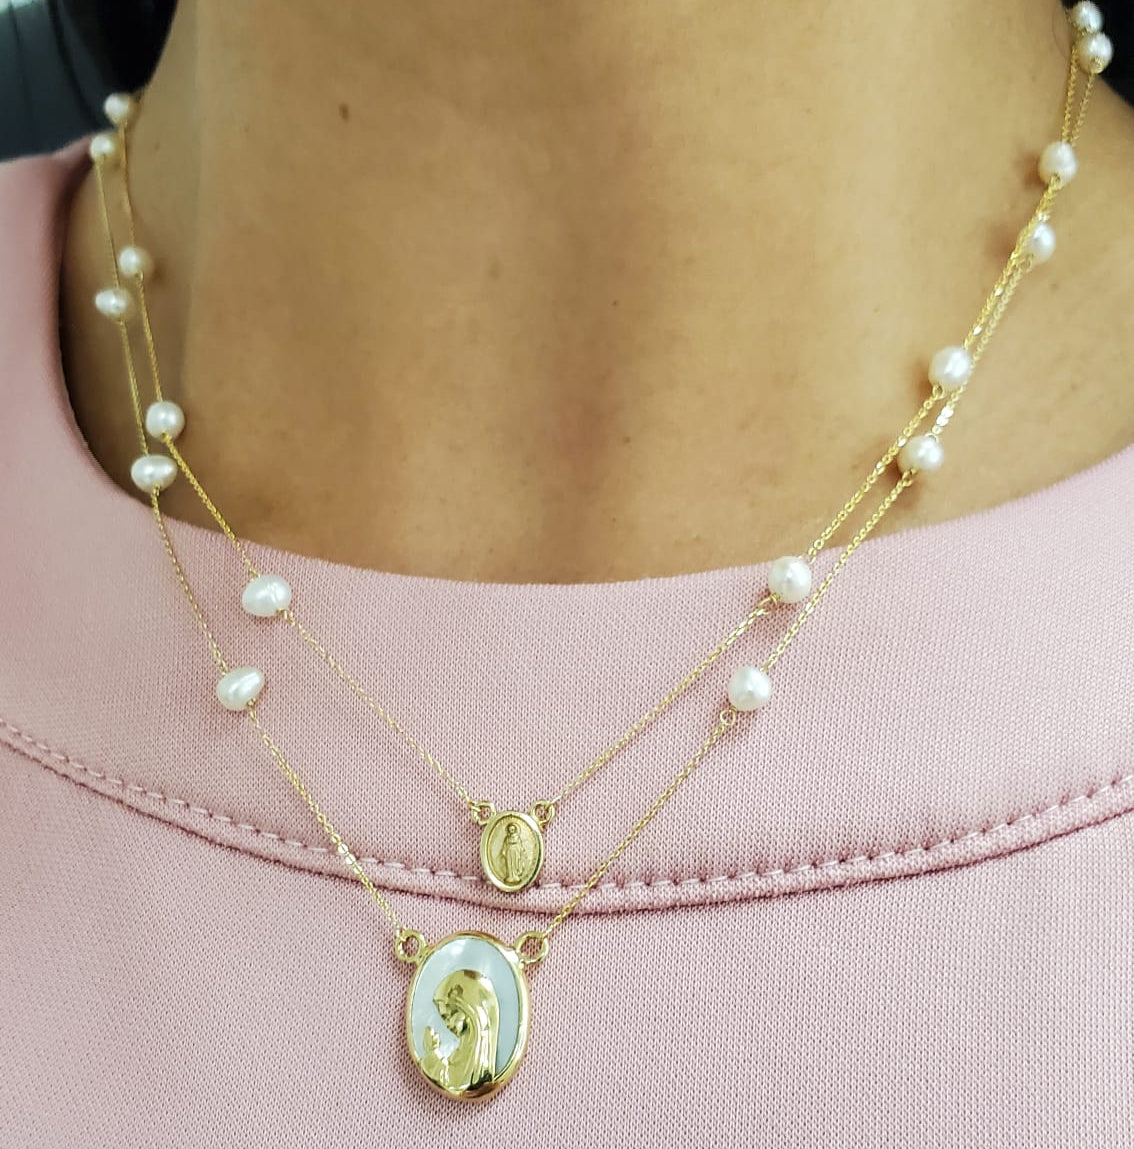 14K Gold Miniature Guadalupe/Miraculous Medal on Pearl Necklace 14K Gold